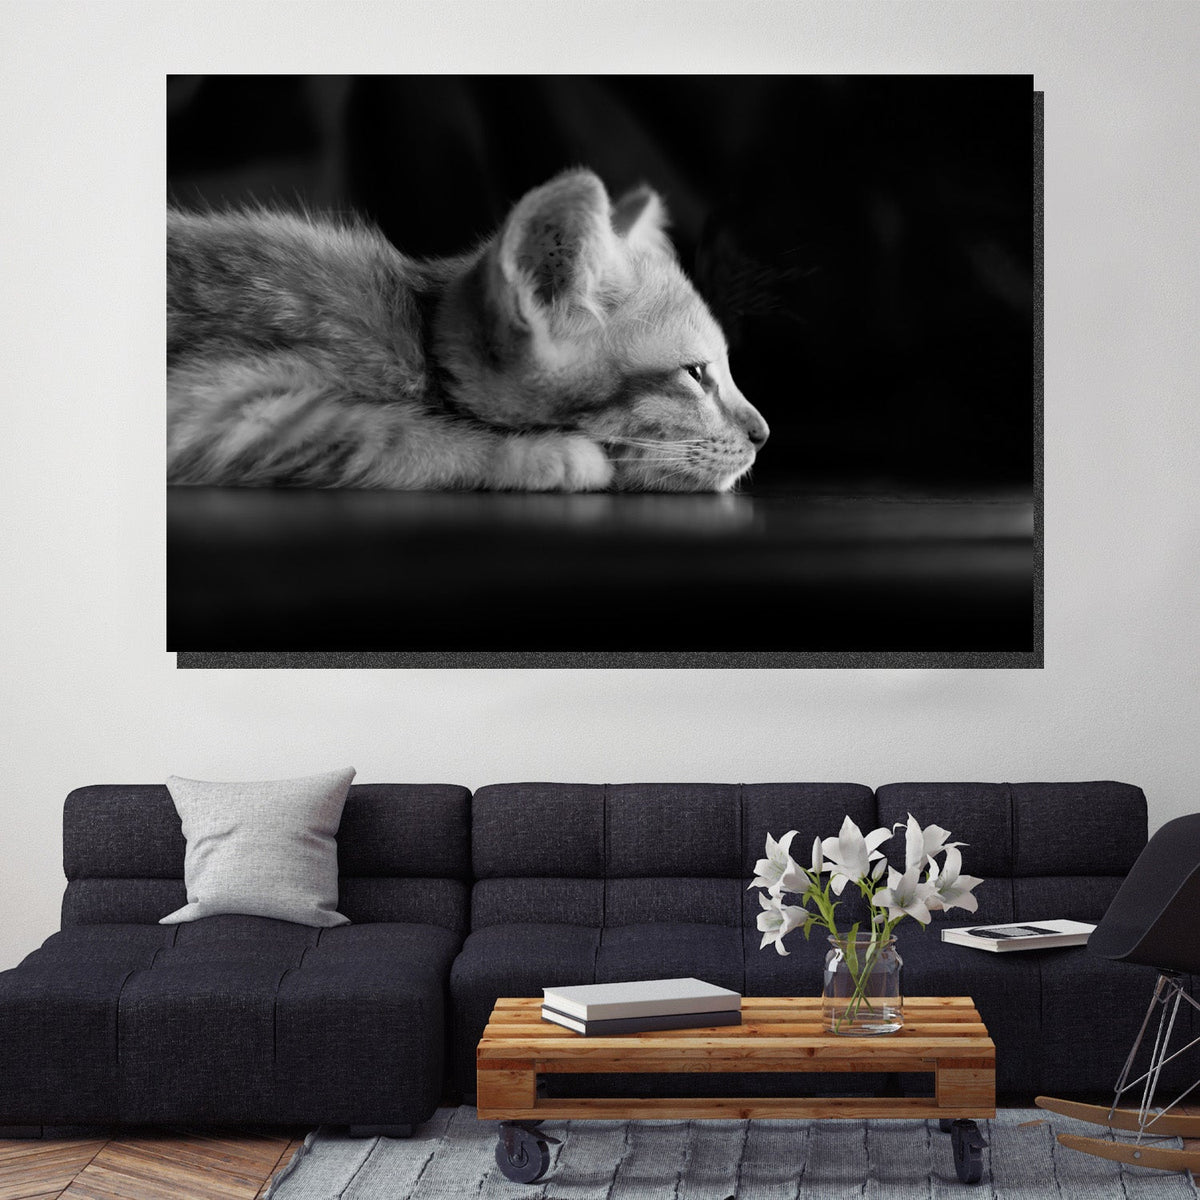 https://cdn.shopify.com/s/files/1/0387/9986/8044/products/LazyKittenCanvasArtprintStretched-3.jpg